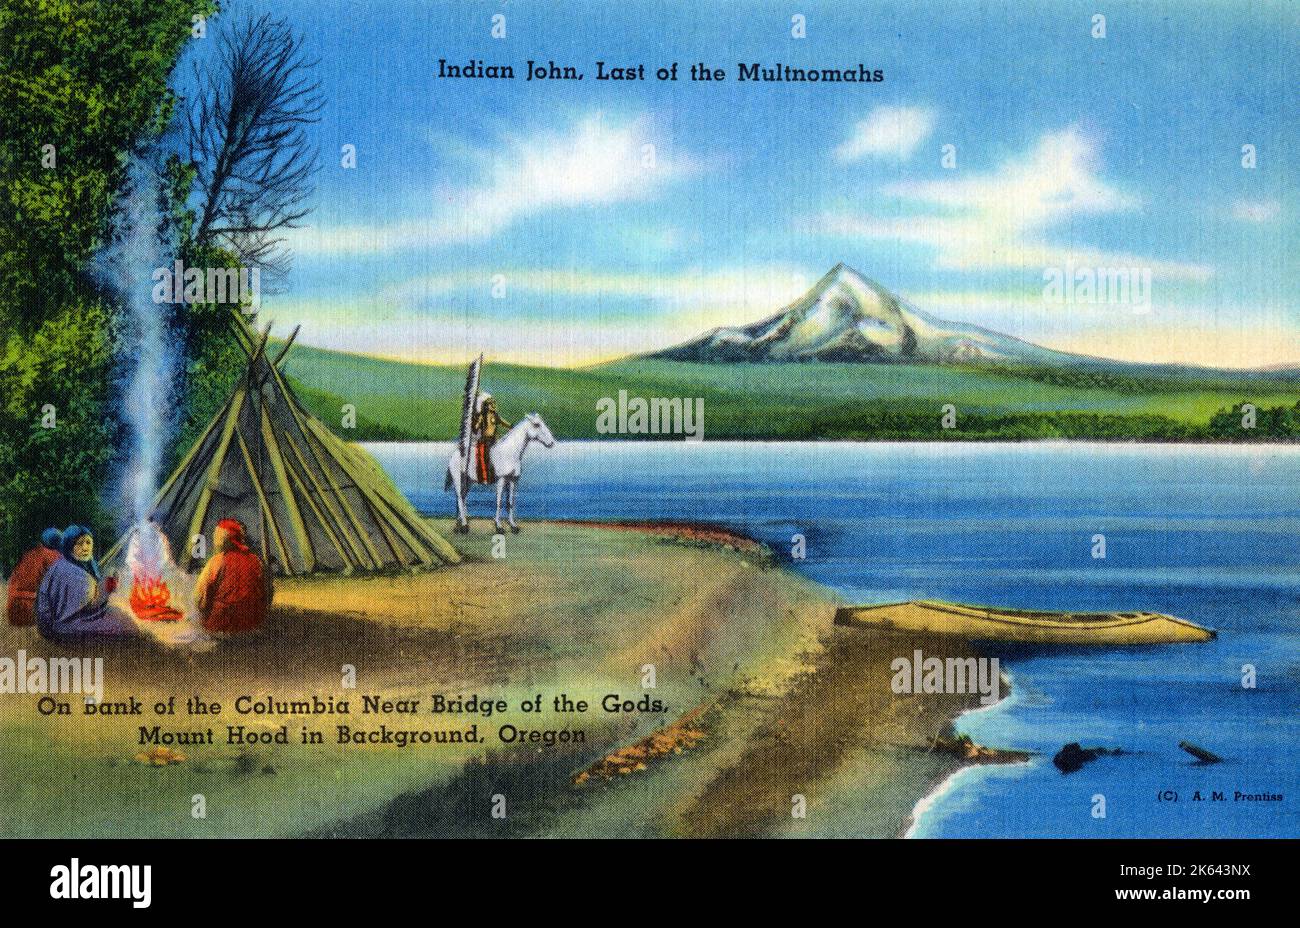 Portland, Oregon, USA - Indian John, last of the Multnomahs at his camp on the bank of the Columbia River near Bridge of the Gods, with Mount Hood in the background. Stock Photo